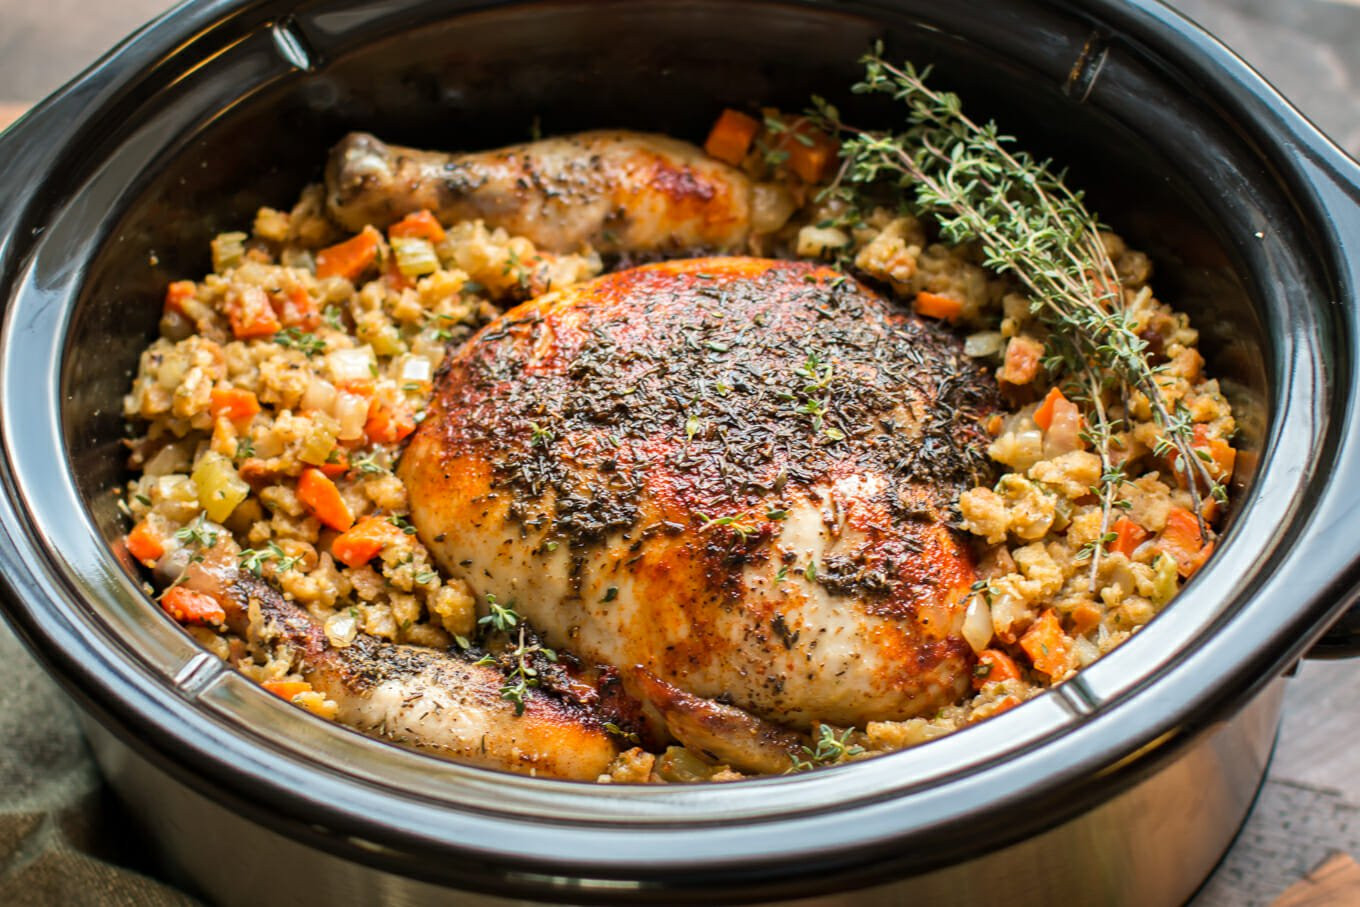 Whole Chicken Recipes Slow Cooker
 Slow Cooker Whole Chicken with Stuffing Cookware and Recipes